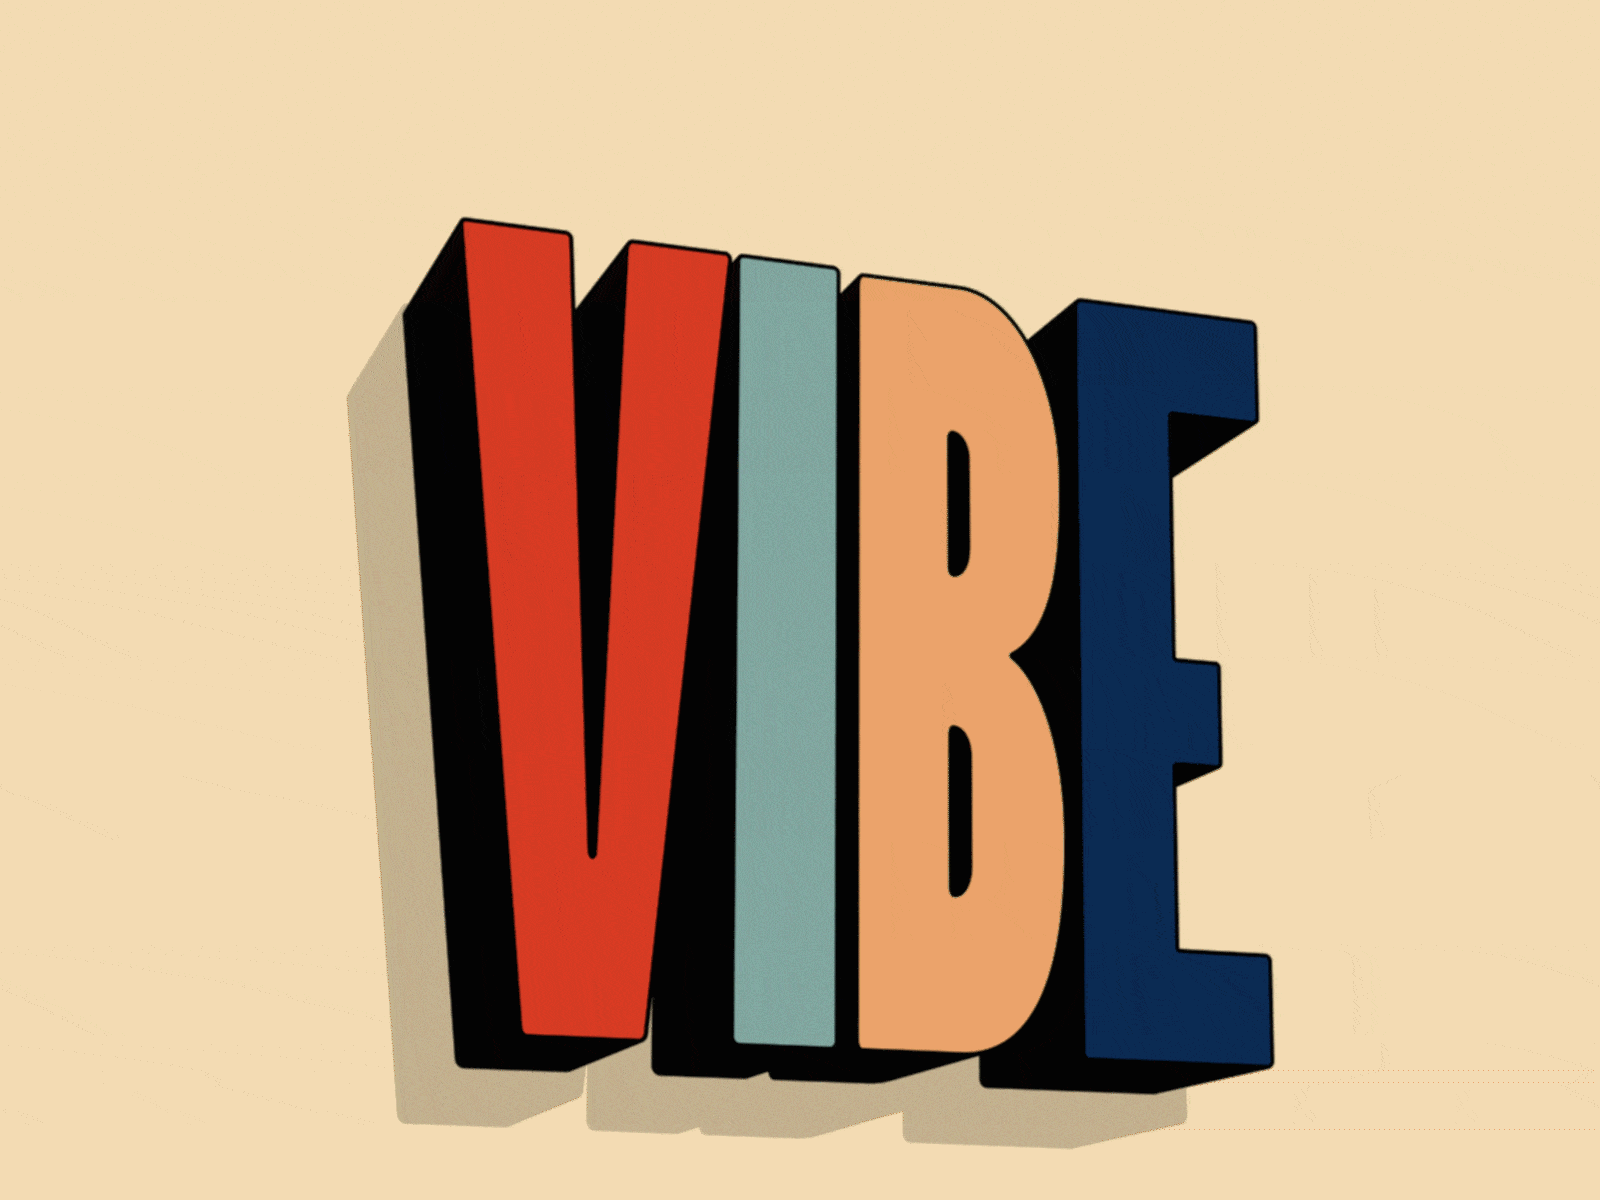 VIBE 2d text 3d text after effect animation design graphic design graphics inspiring kinetic animation kinetic text animation kinetictype motion motion design motion graphics motion text text animaion type animation typography vibe